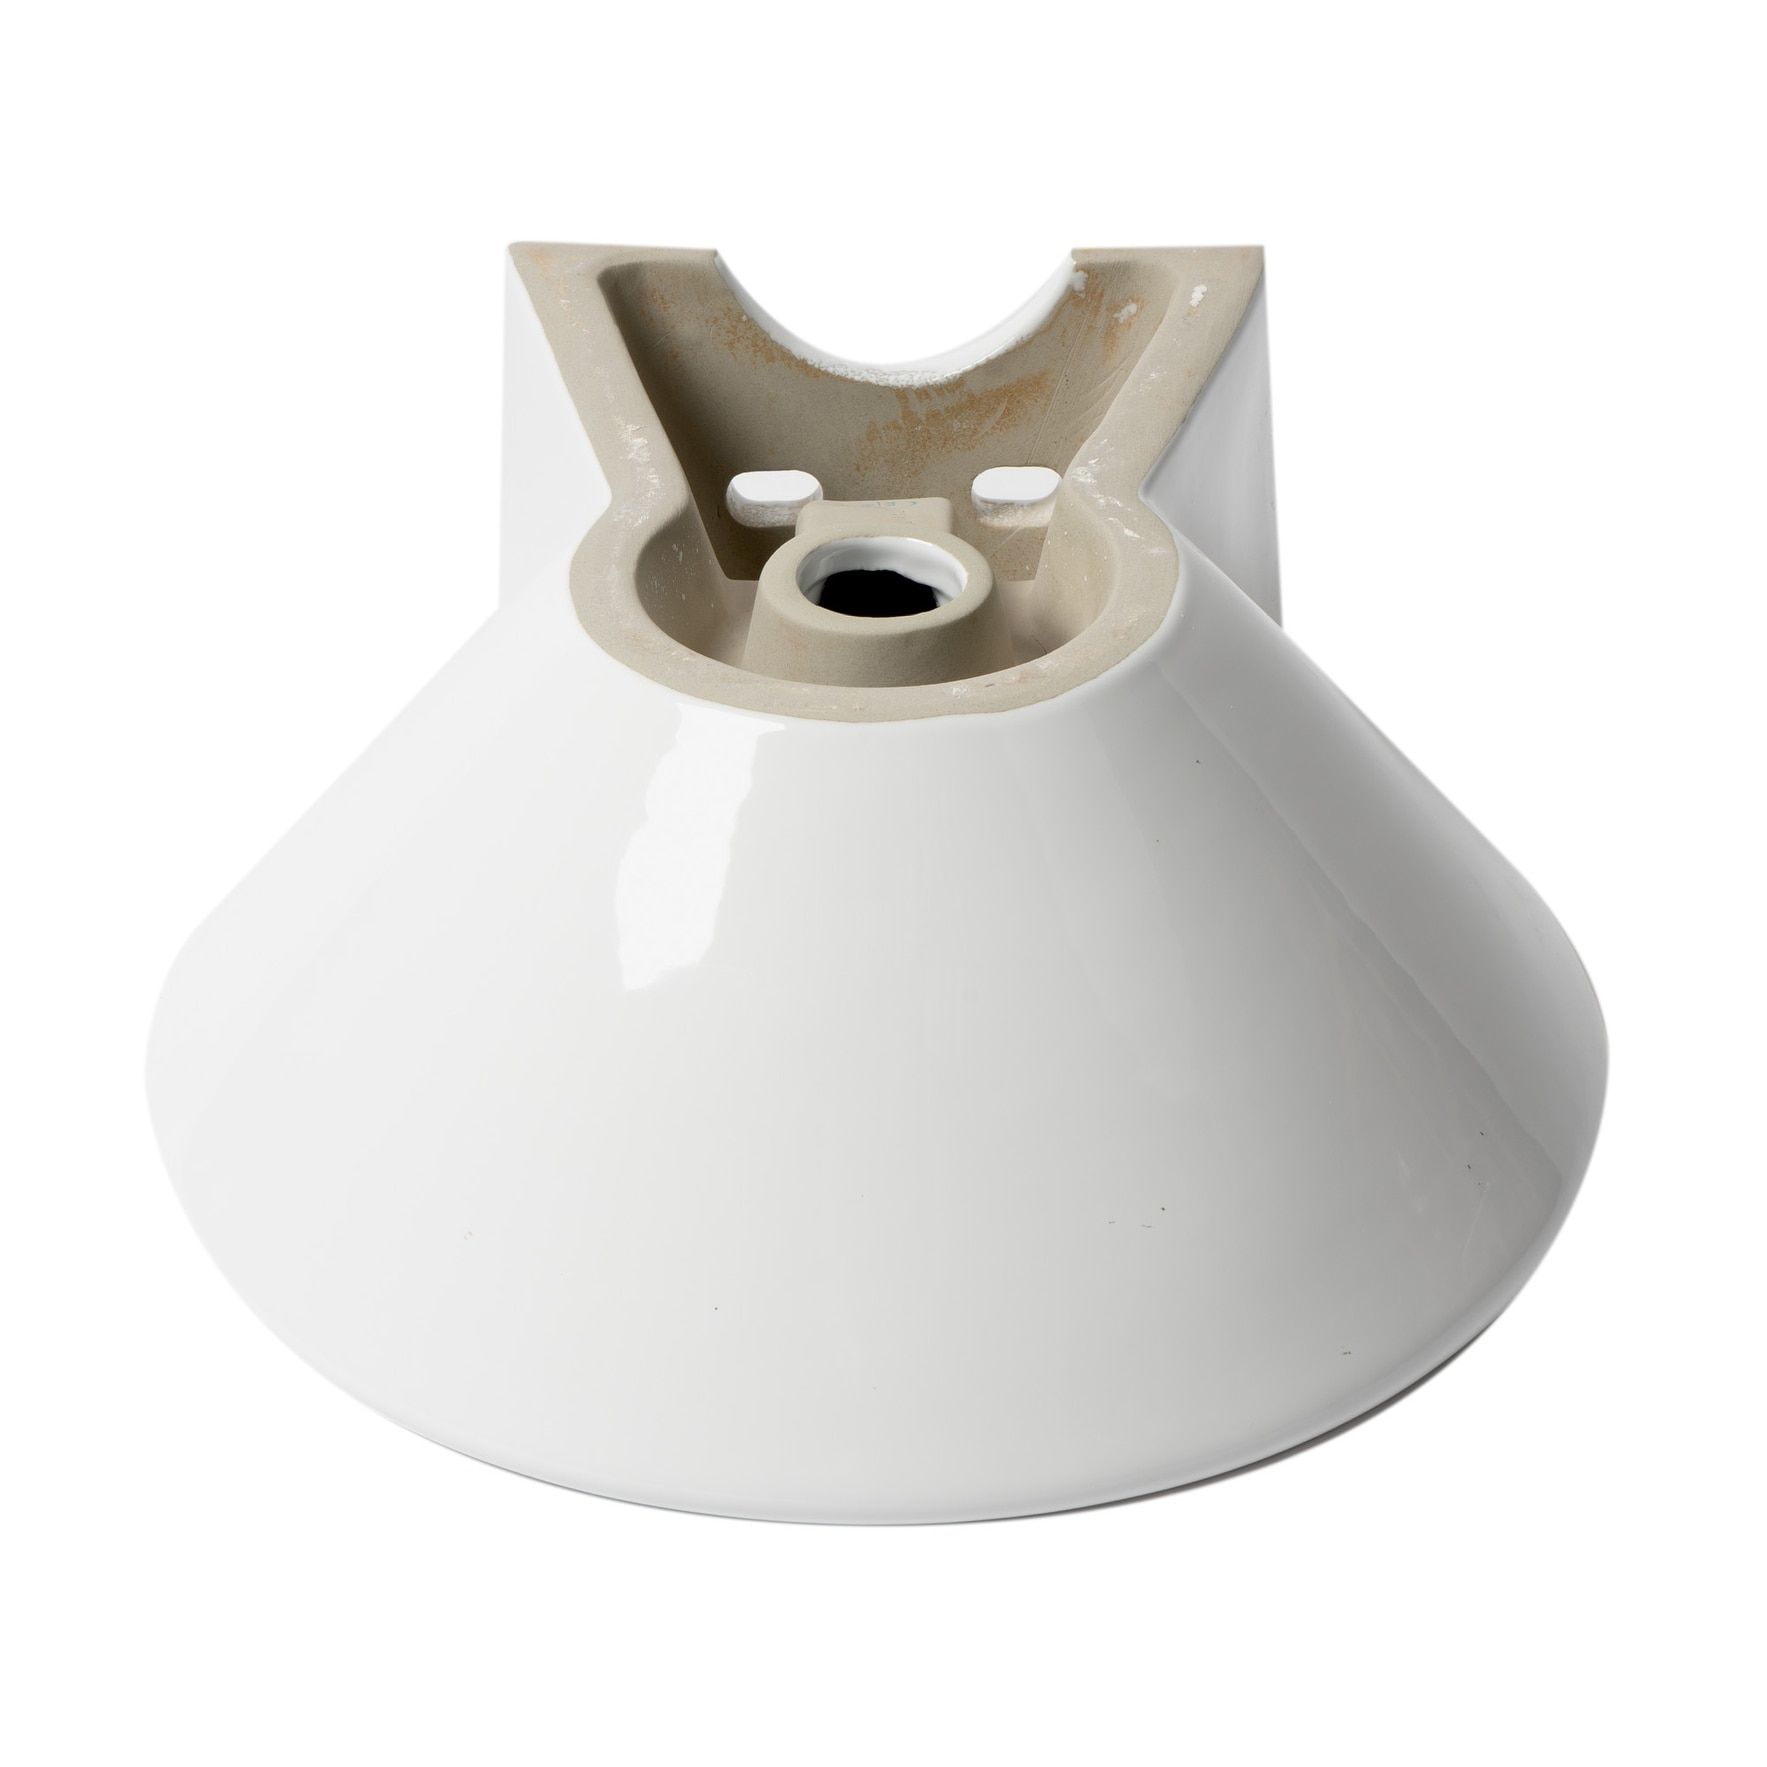 ALFI brand White 17" Round Wall Mounted Ceramic Sink with Faucet Hole